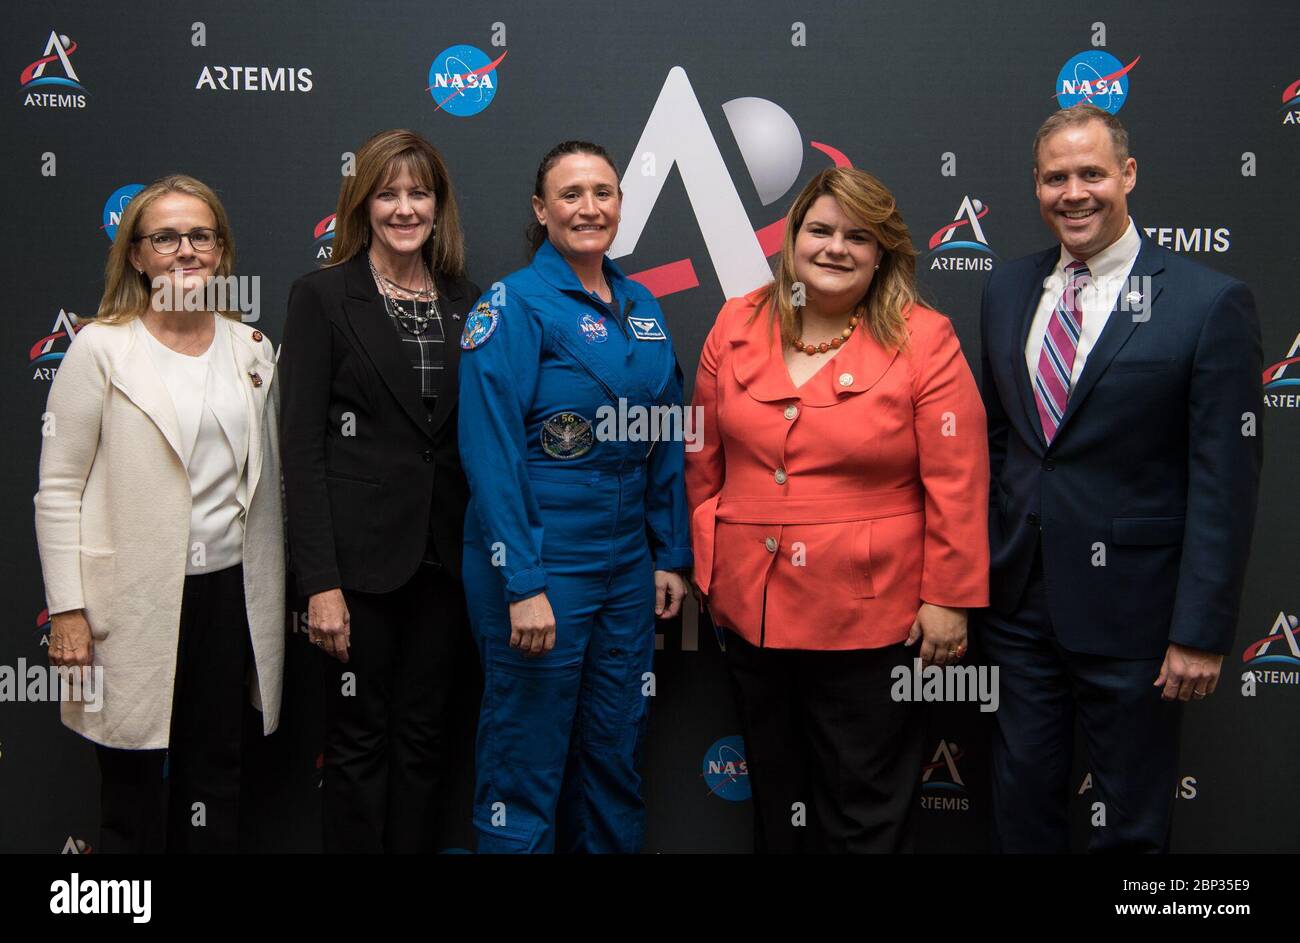 Women's Caucus Event on Artemis  From left to right, U.S. Representative Madeleine Dean, D-Pa., former astronaut and current director of NASA’s Glenn Research Center, Dr. Janet Kavandi, NASA astronaut Serena Auñón-Chancellor, U.S. resident commissioner of Puerto Rico, Jenniffer González-Colón, R-Puerto Rico, and NASA Administrator Jim Bridenstine pose for a photo just before a bipartisan Congressional Caucus for Women’s Issues briefing on NASA’s Artemis lunar exploration program, Wednesday, September 11, 2019 at the Rayburn House Office Building in Washington. Stock Photo